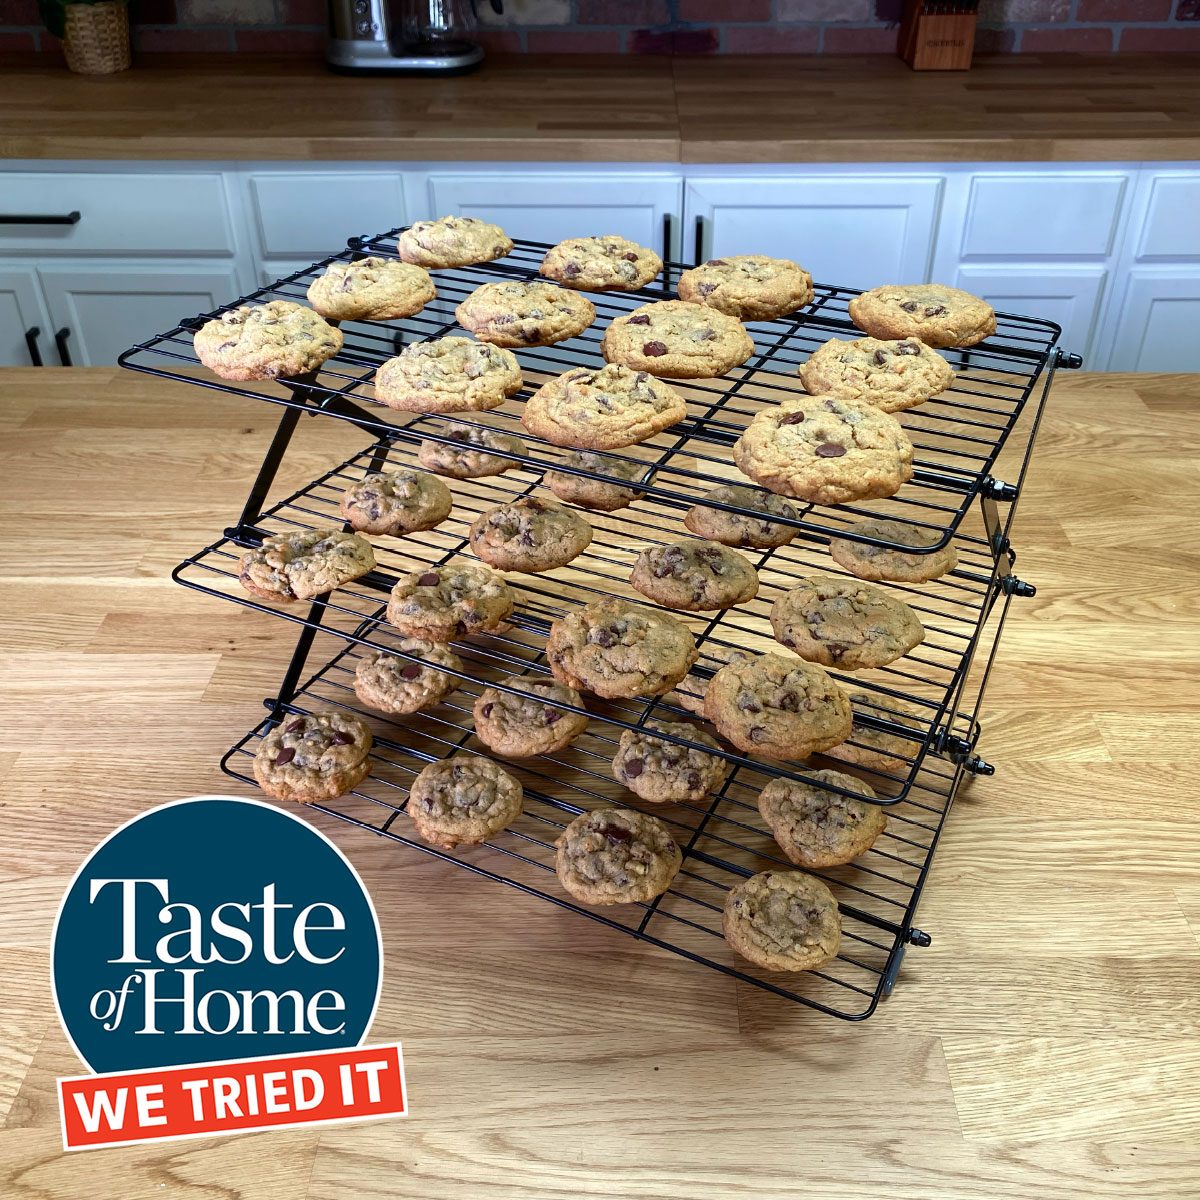 https://www.tasteofhome.com/wp-content/uploads/2023/06/This-Collapsible-Baking-Rack-Offers-Triple-the-Cookie-Cooling-Space_CoolingRack1_Madi-Koetting-Taste-of-Home_FT.jpg